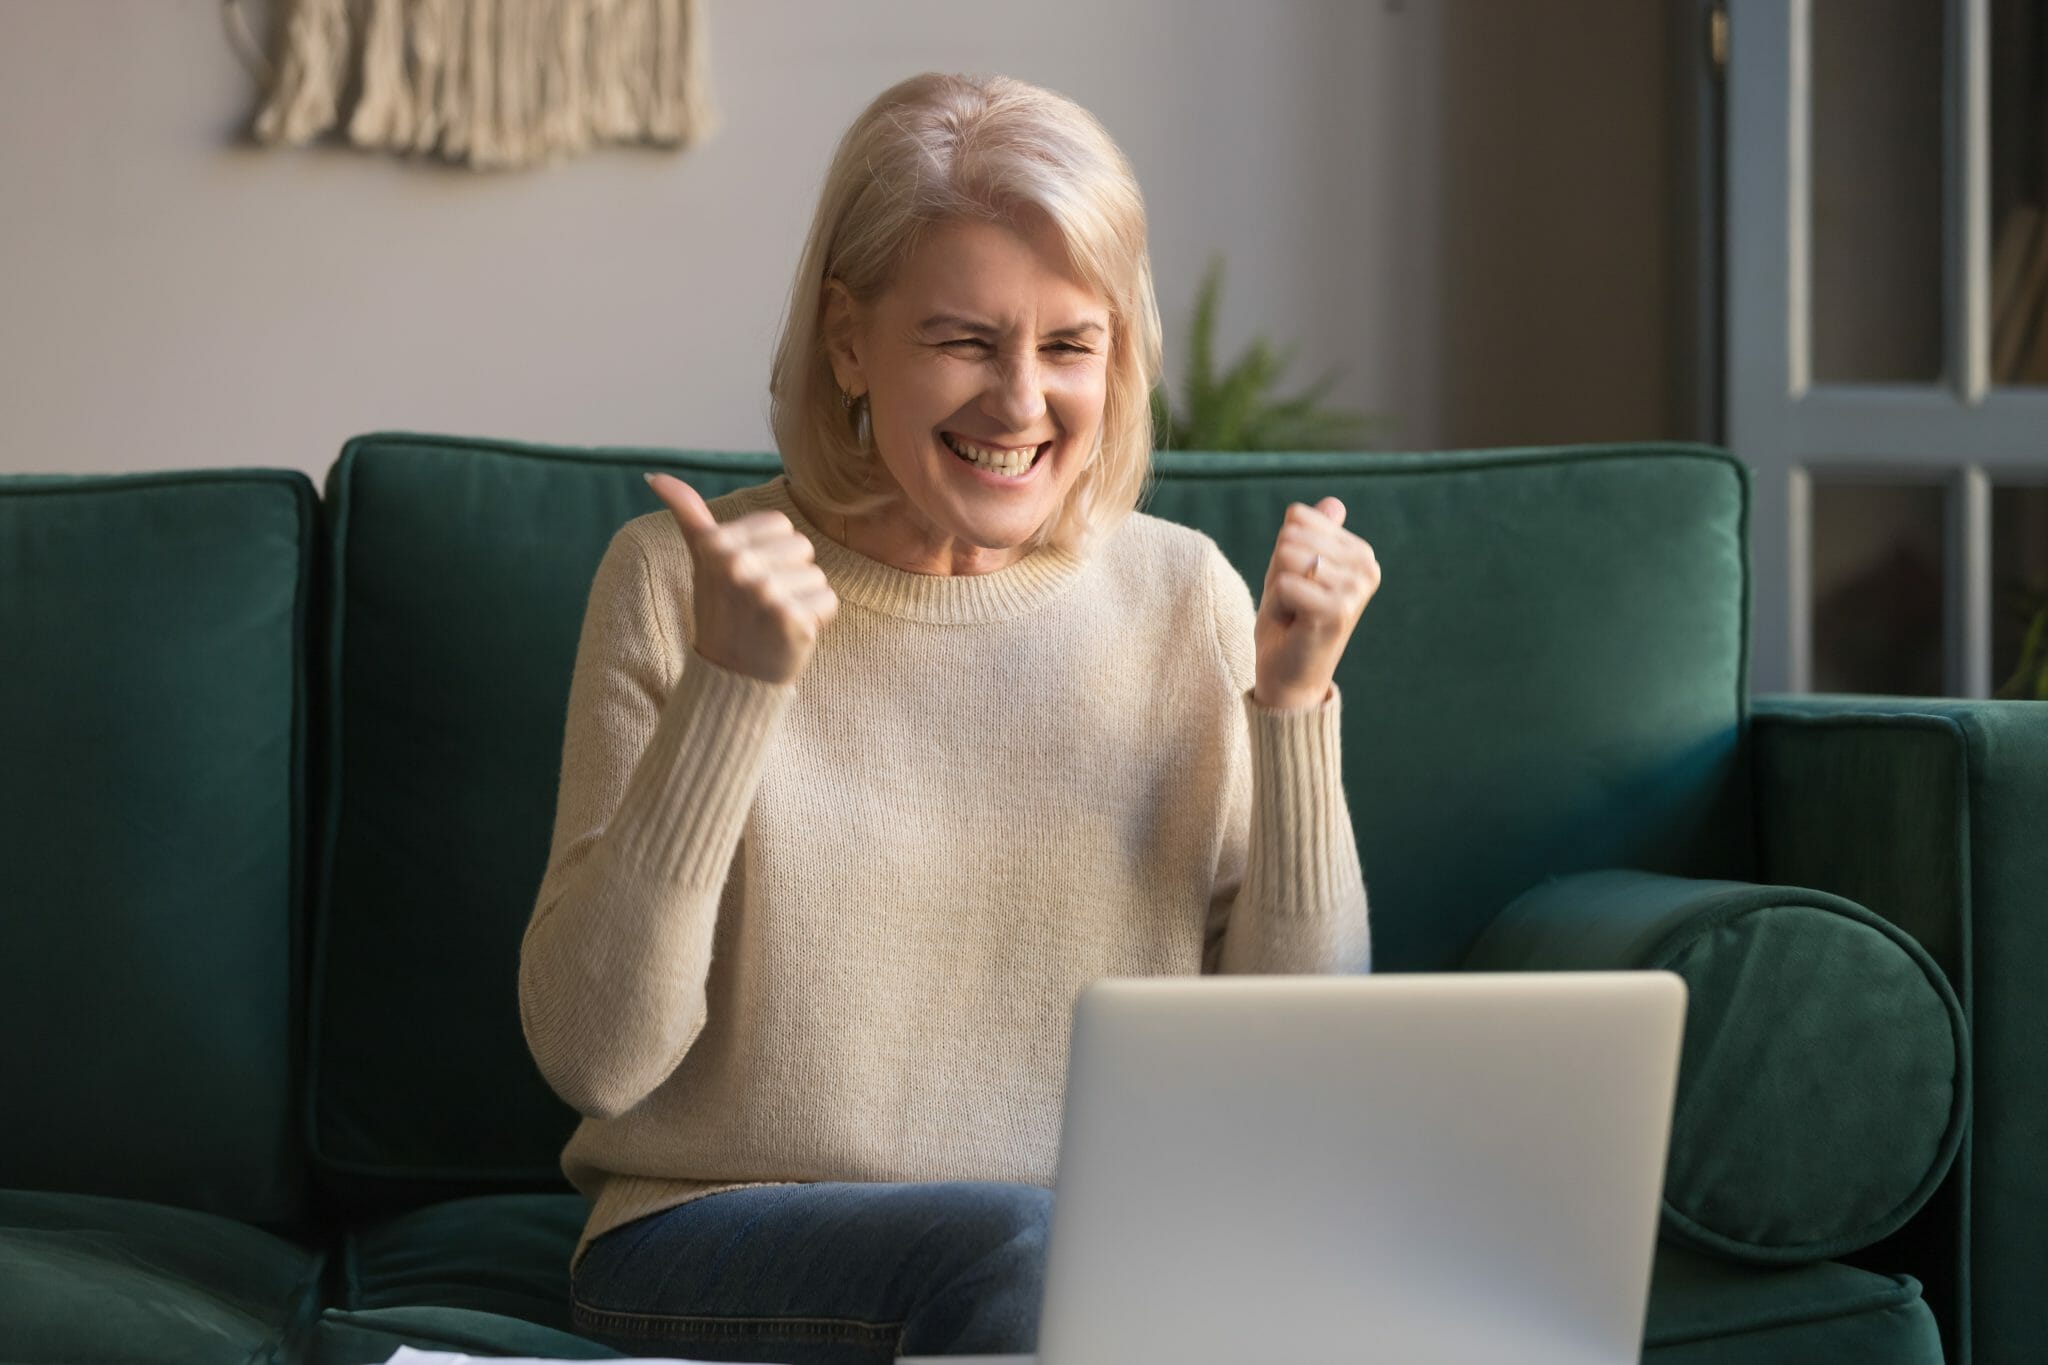 Woman giving herself a thumbs up while looking at a laptop